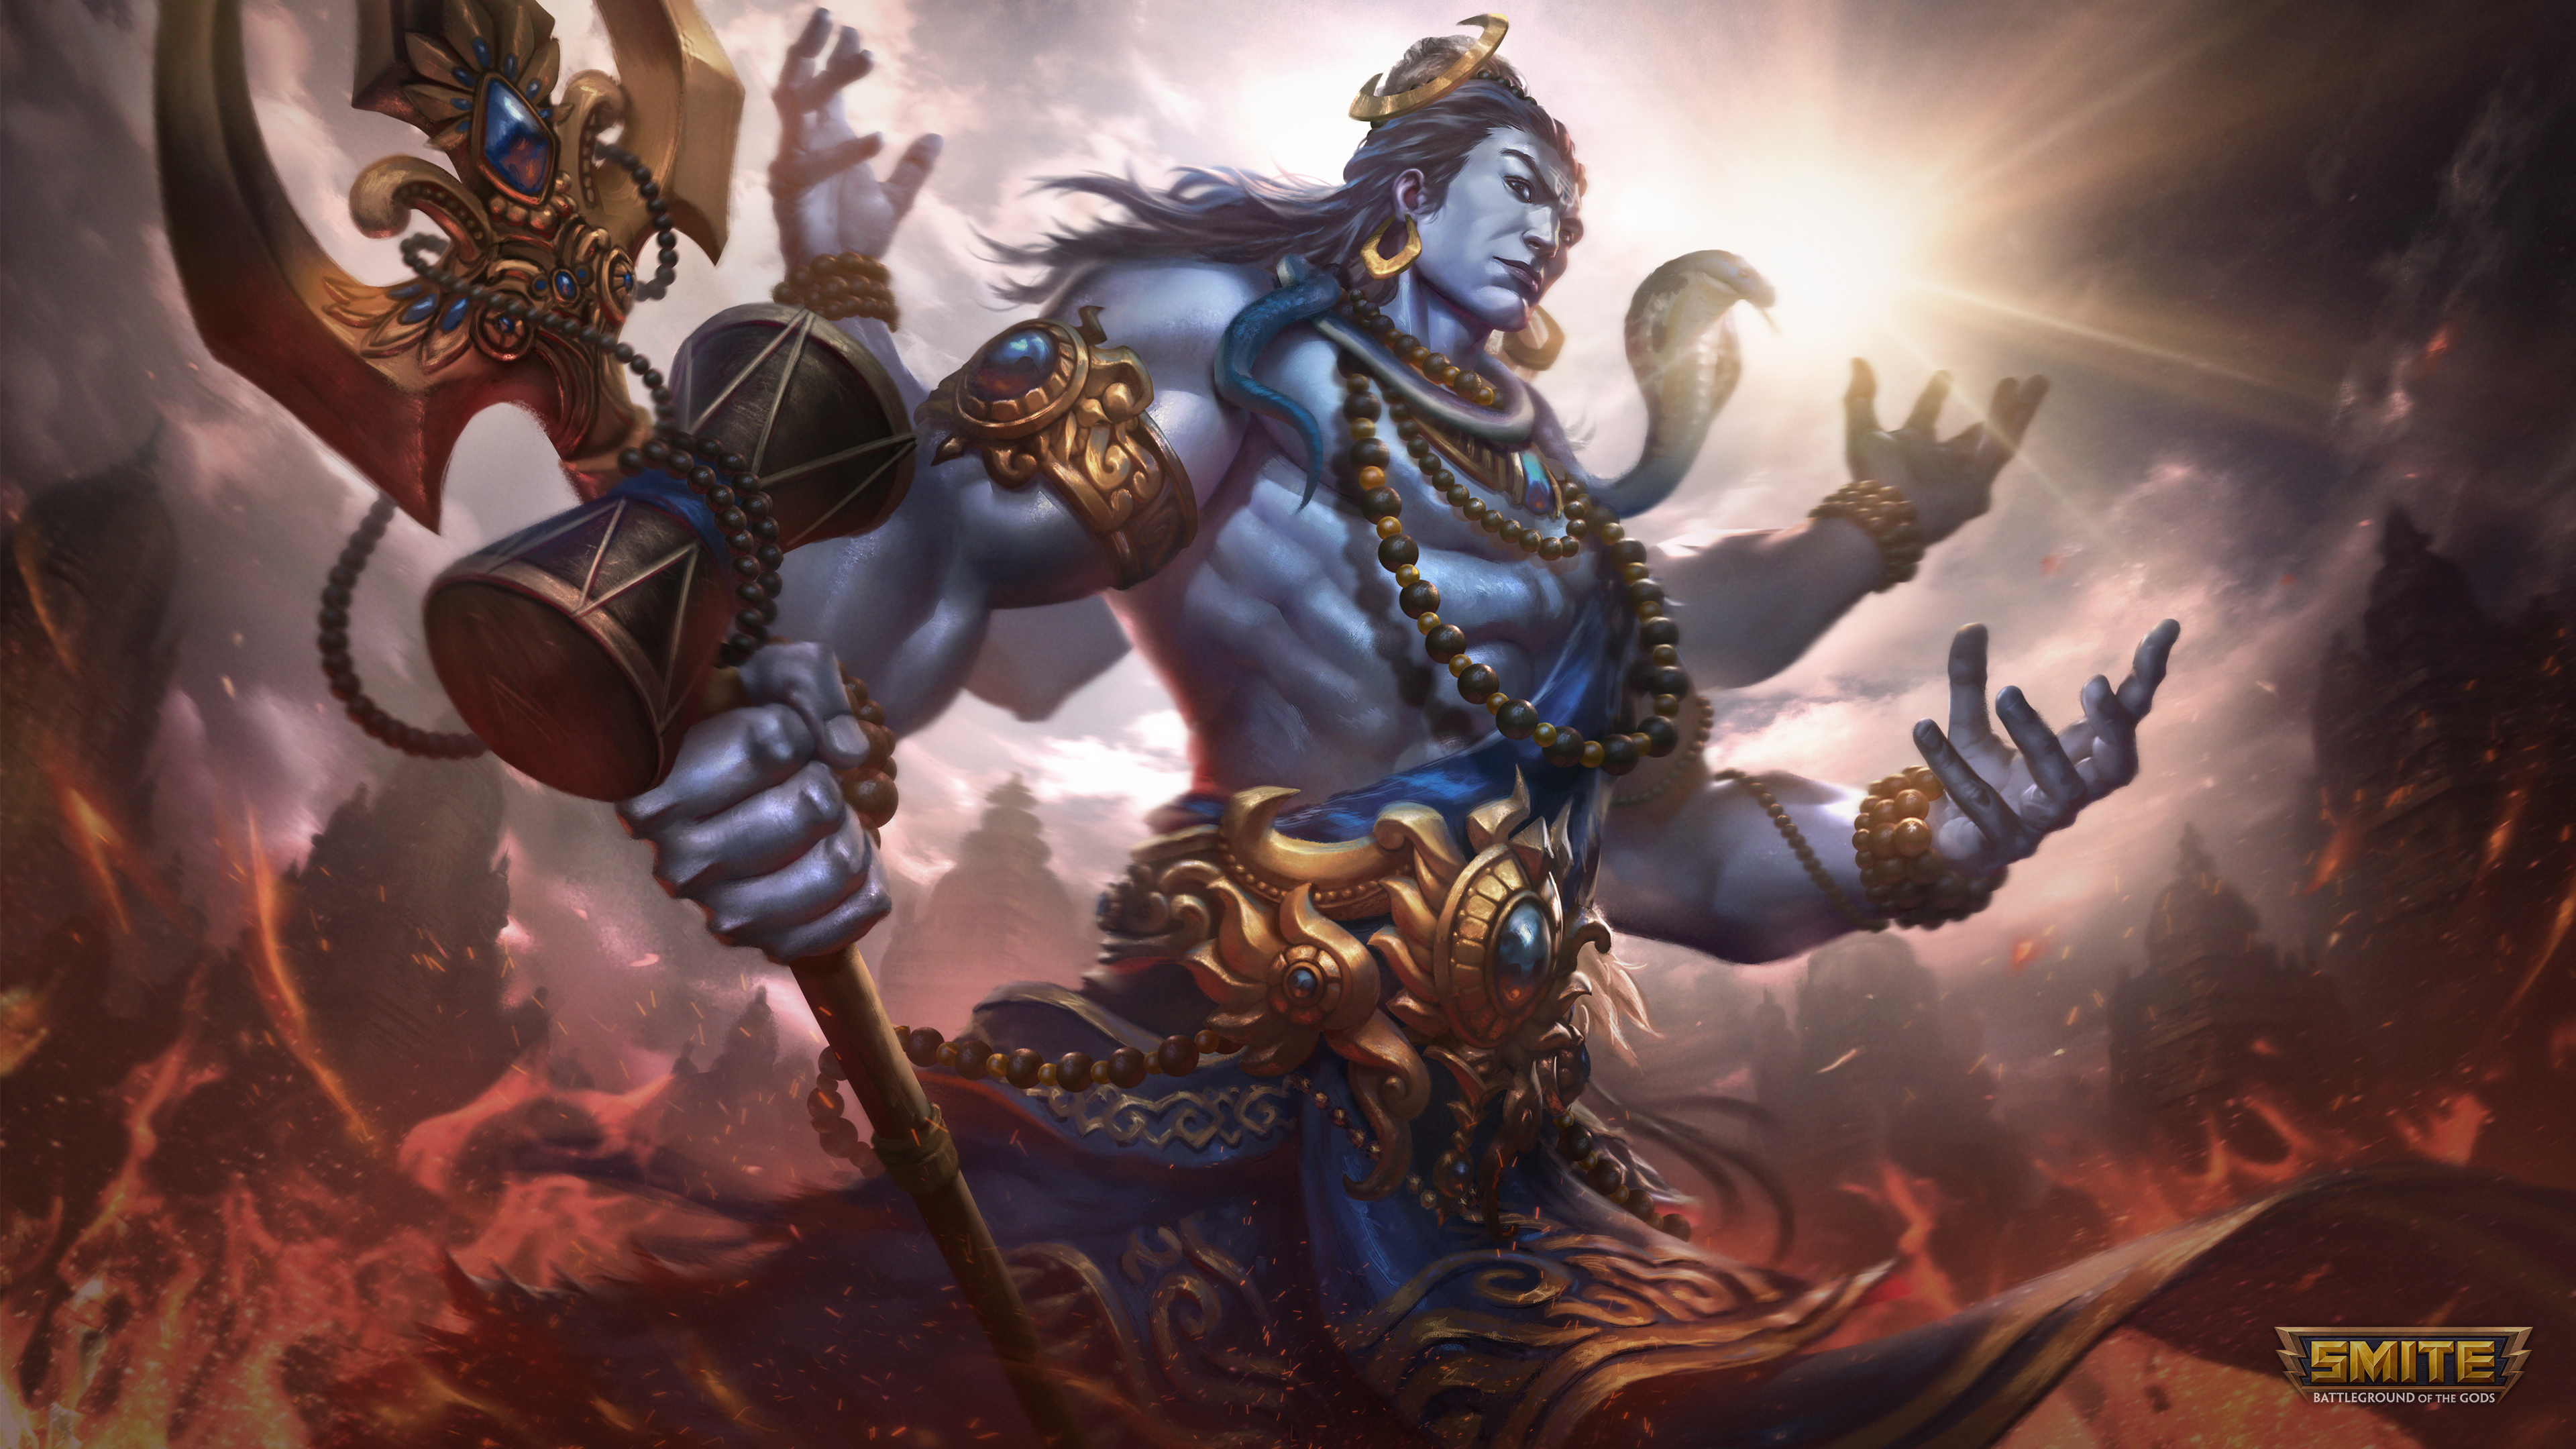 Lord Shiva Wallpaper 4K, The Destroyer, Smite, Games